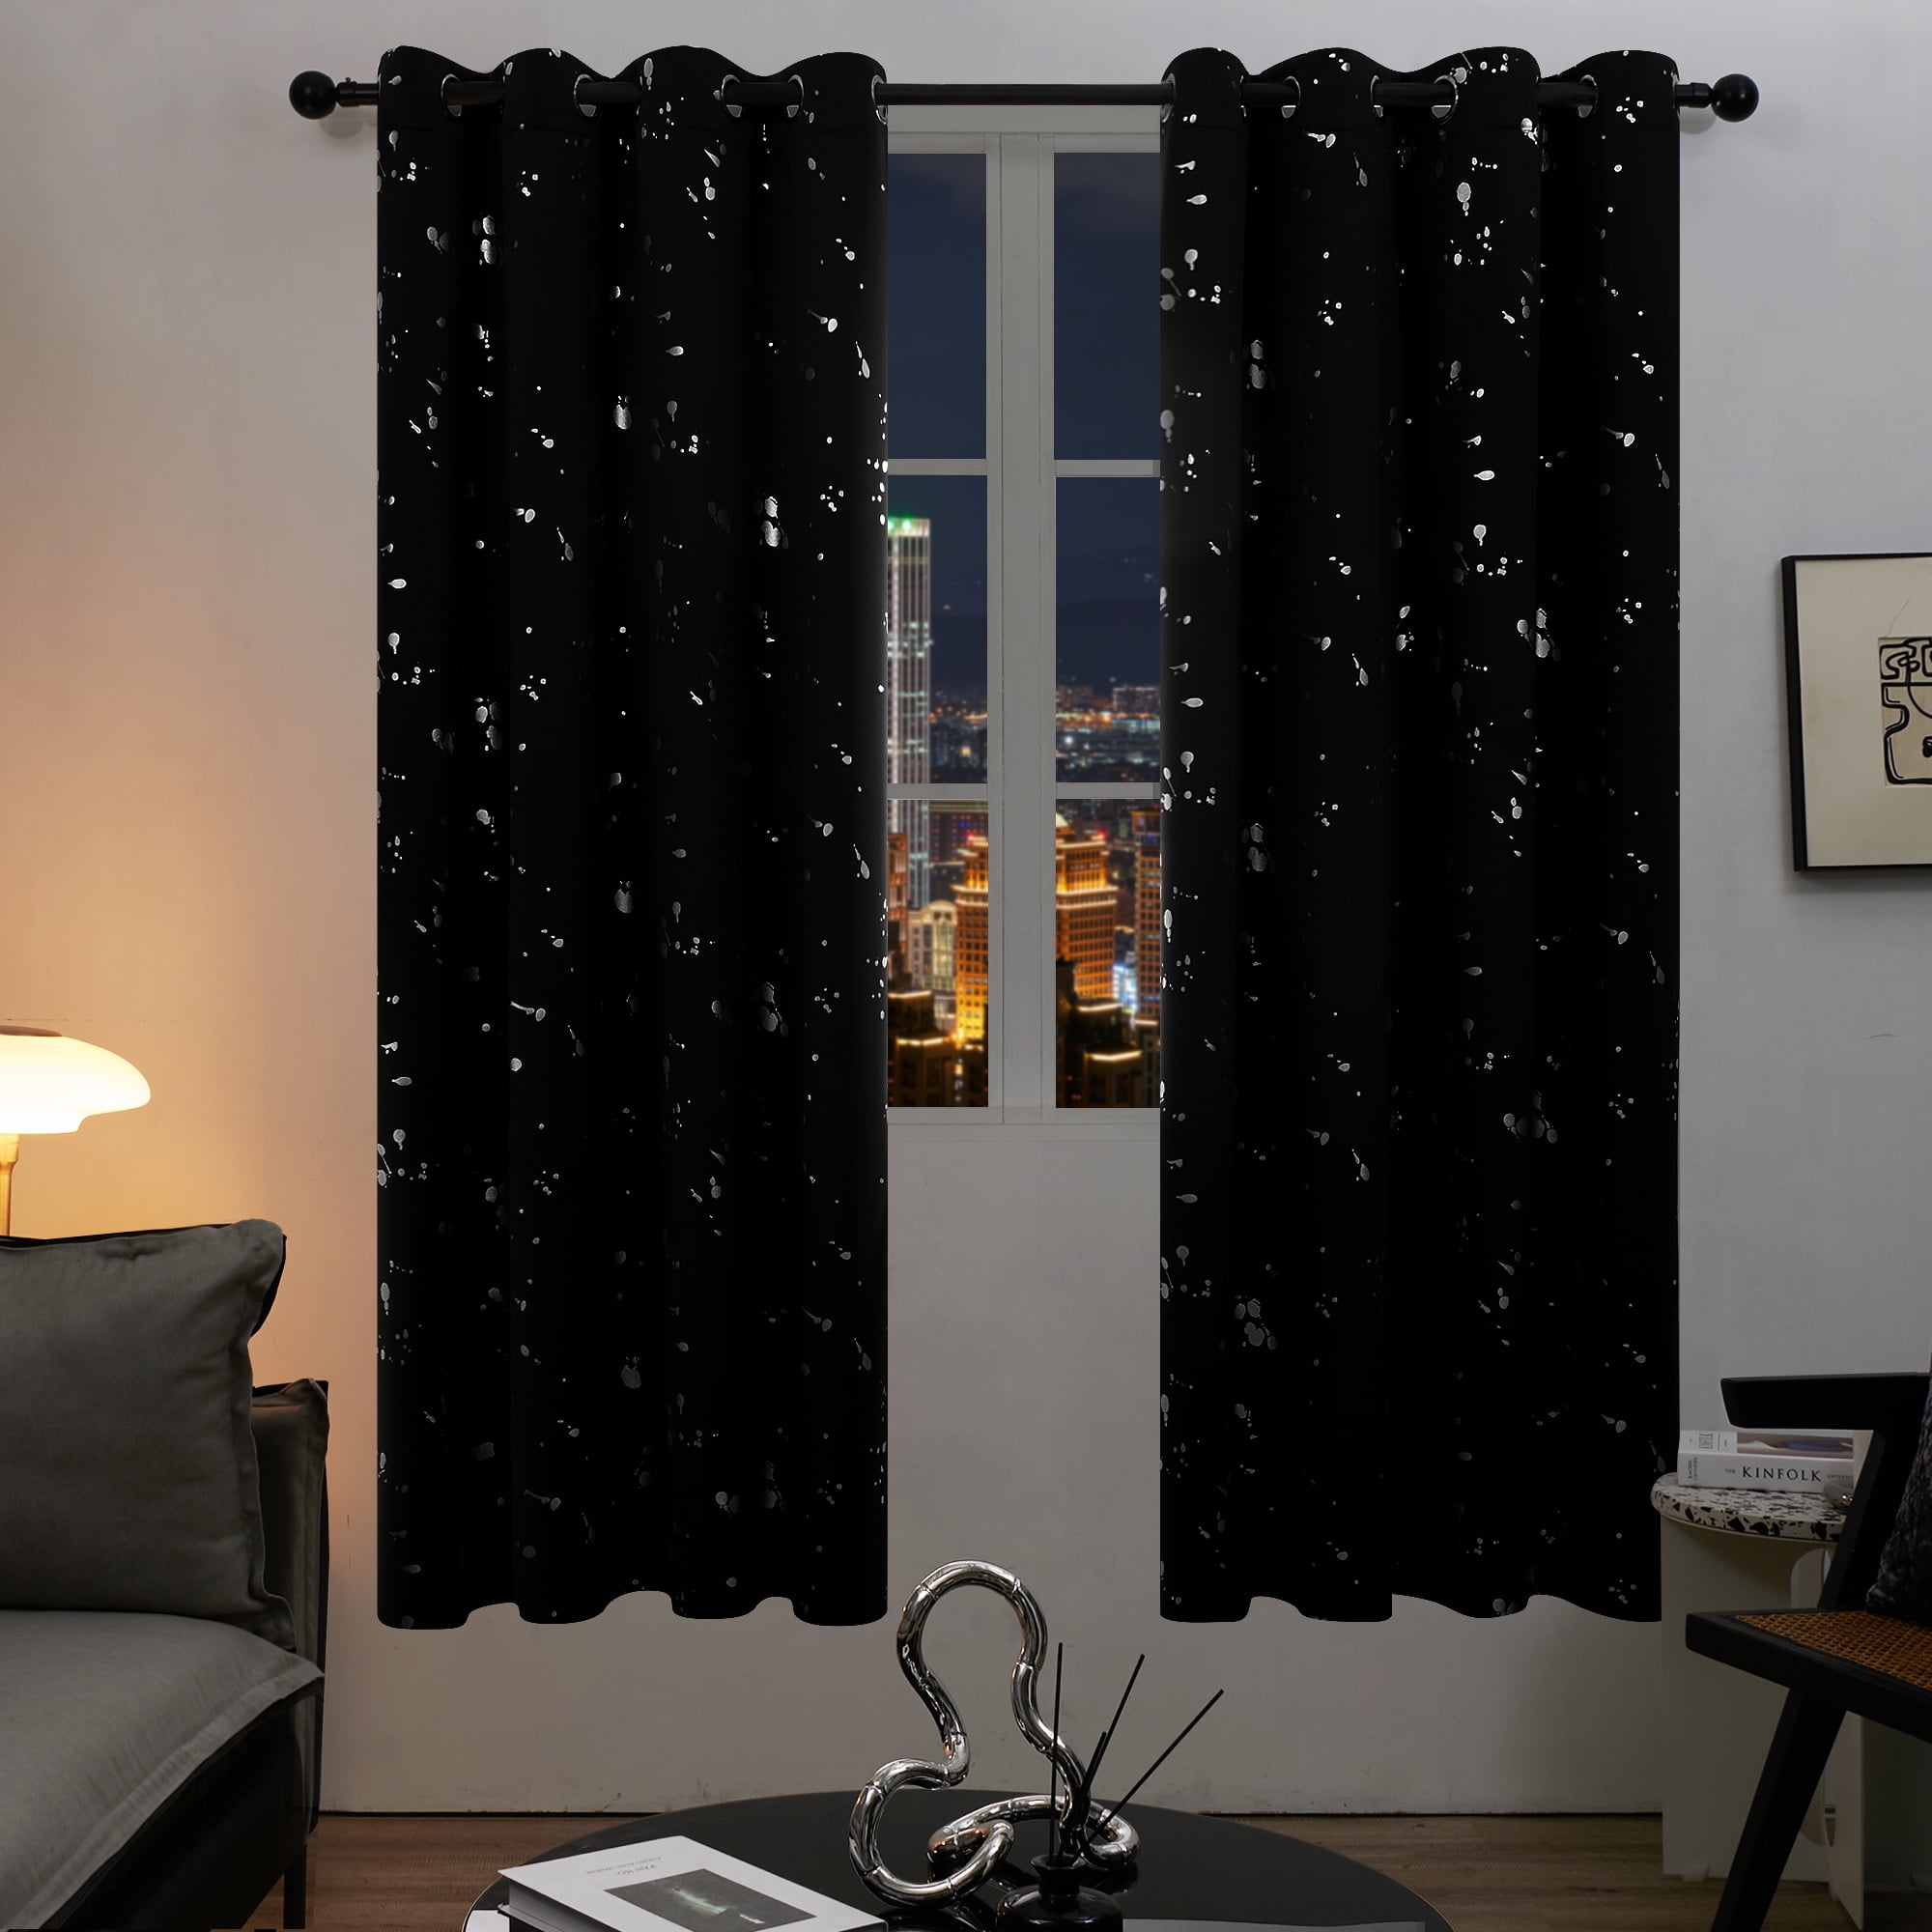 Details about   Black Rose Printed Curtains For Living Room Bedroom Sleep Blackout Window Drapes 